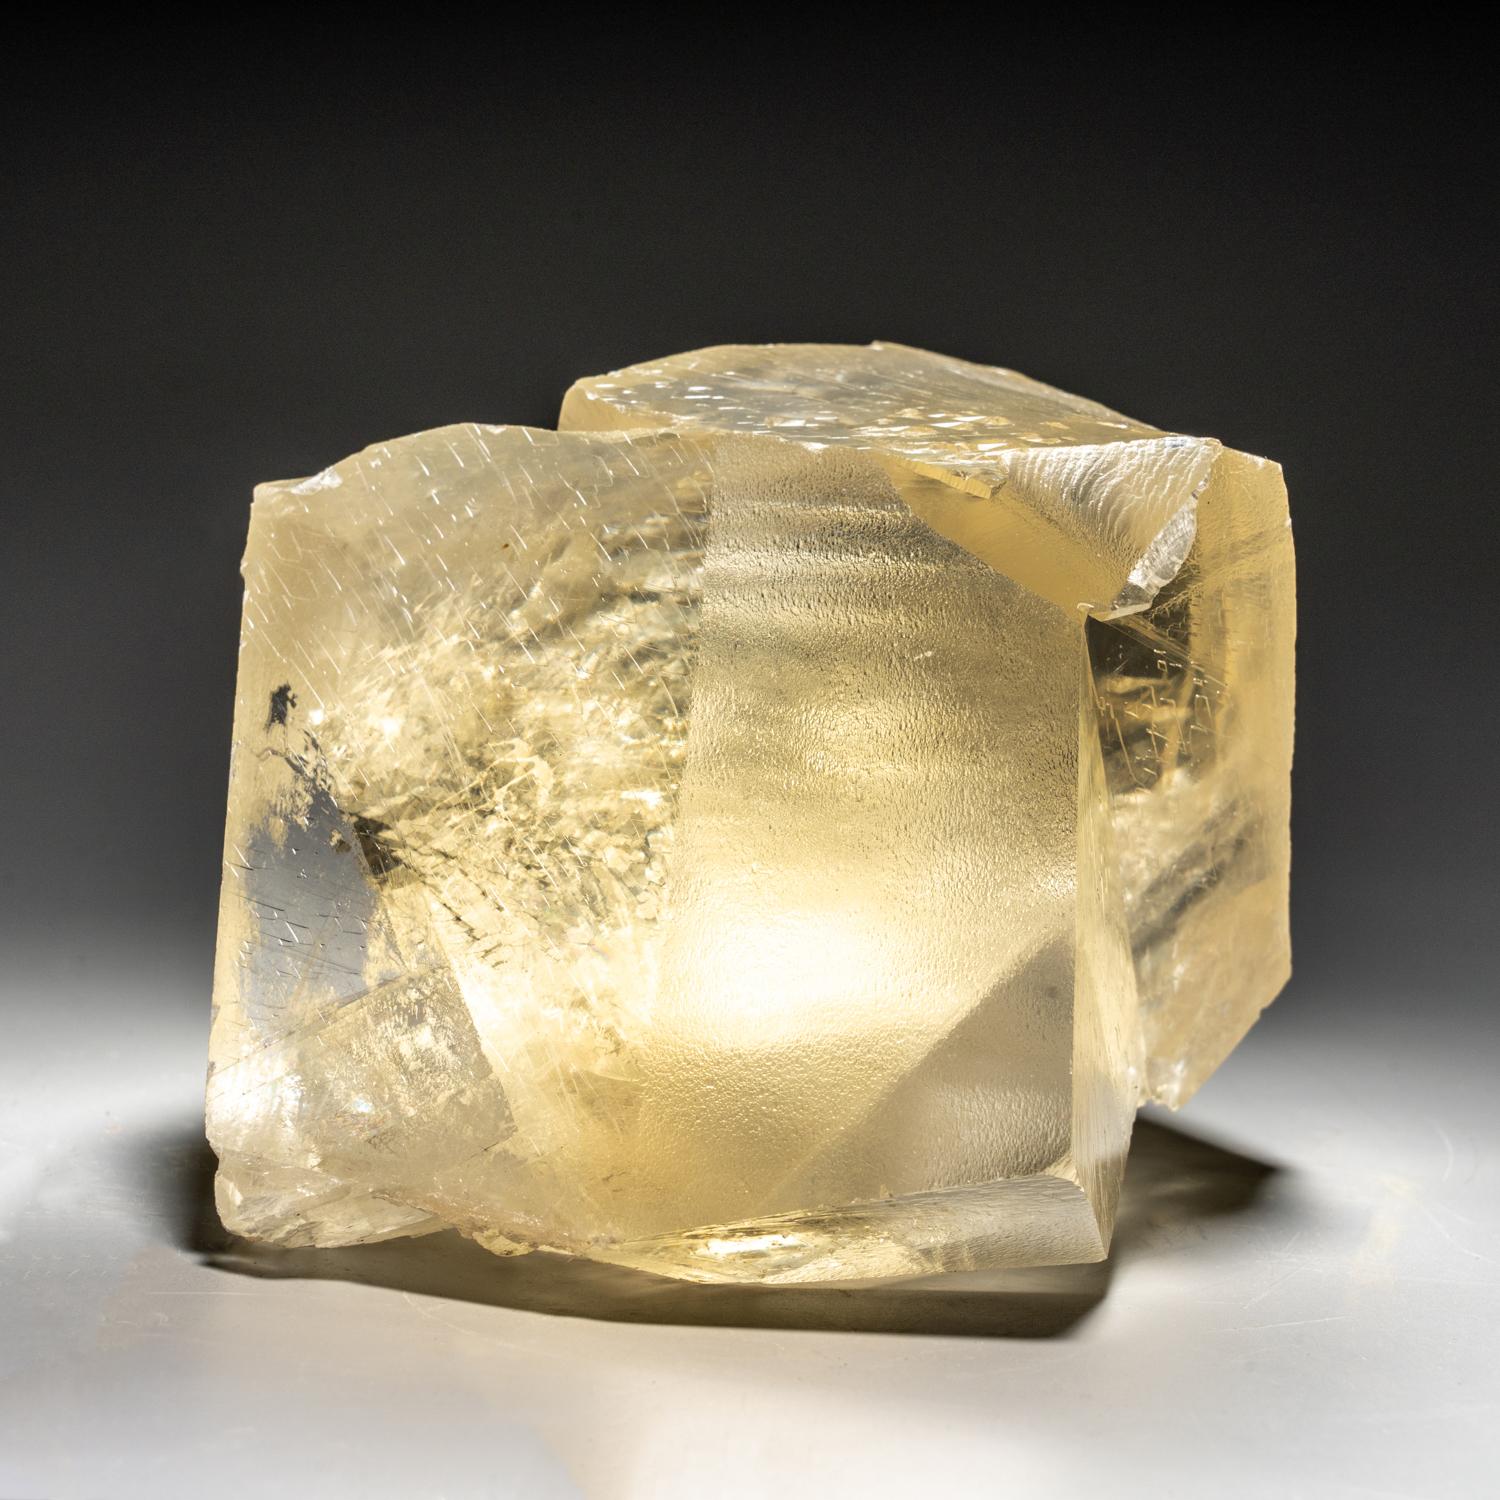 From Nasik District, Maharashtra, India

Penetrating twinned crystals of transparent golden yellow calcite with silky luster faces and sharp terminations. The twin orientation is well defined and visible throught the termination faces.

 2 lbs, 5 x